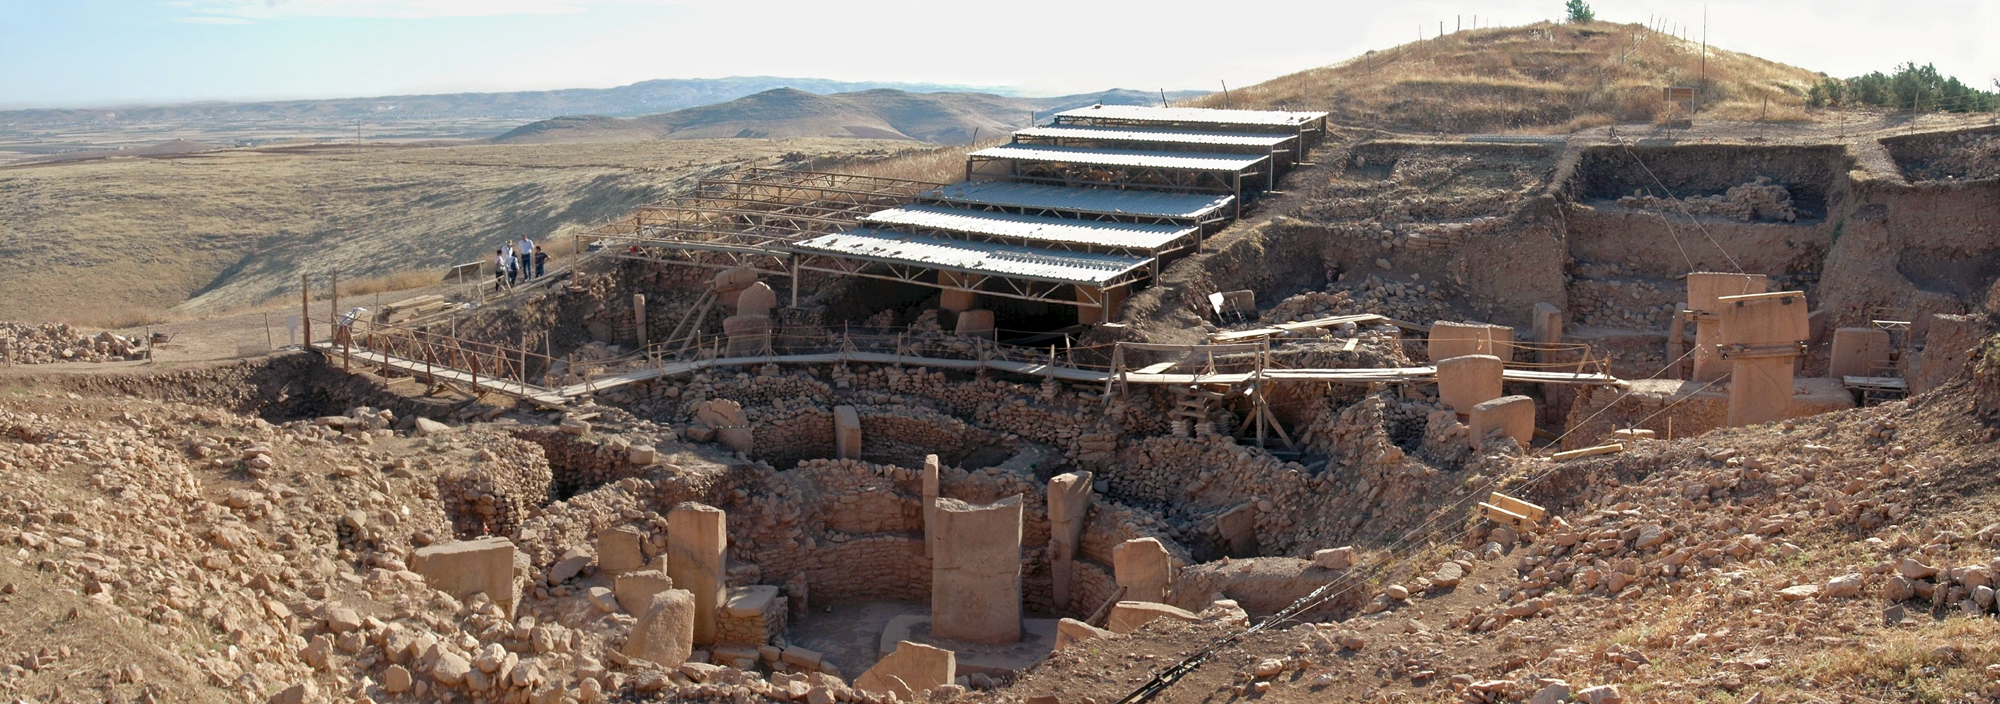 Gobekli Tepe archaeological site with Neolithic carvings